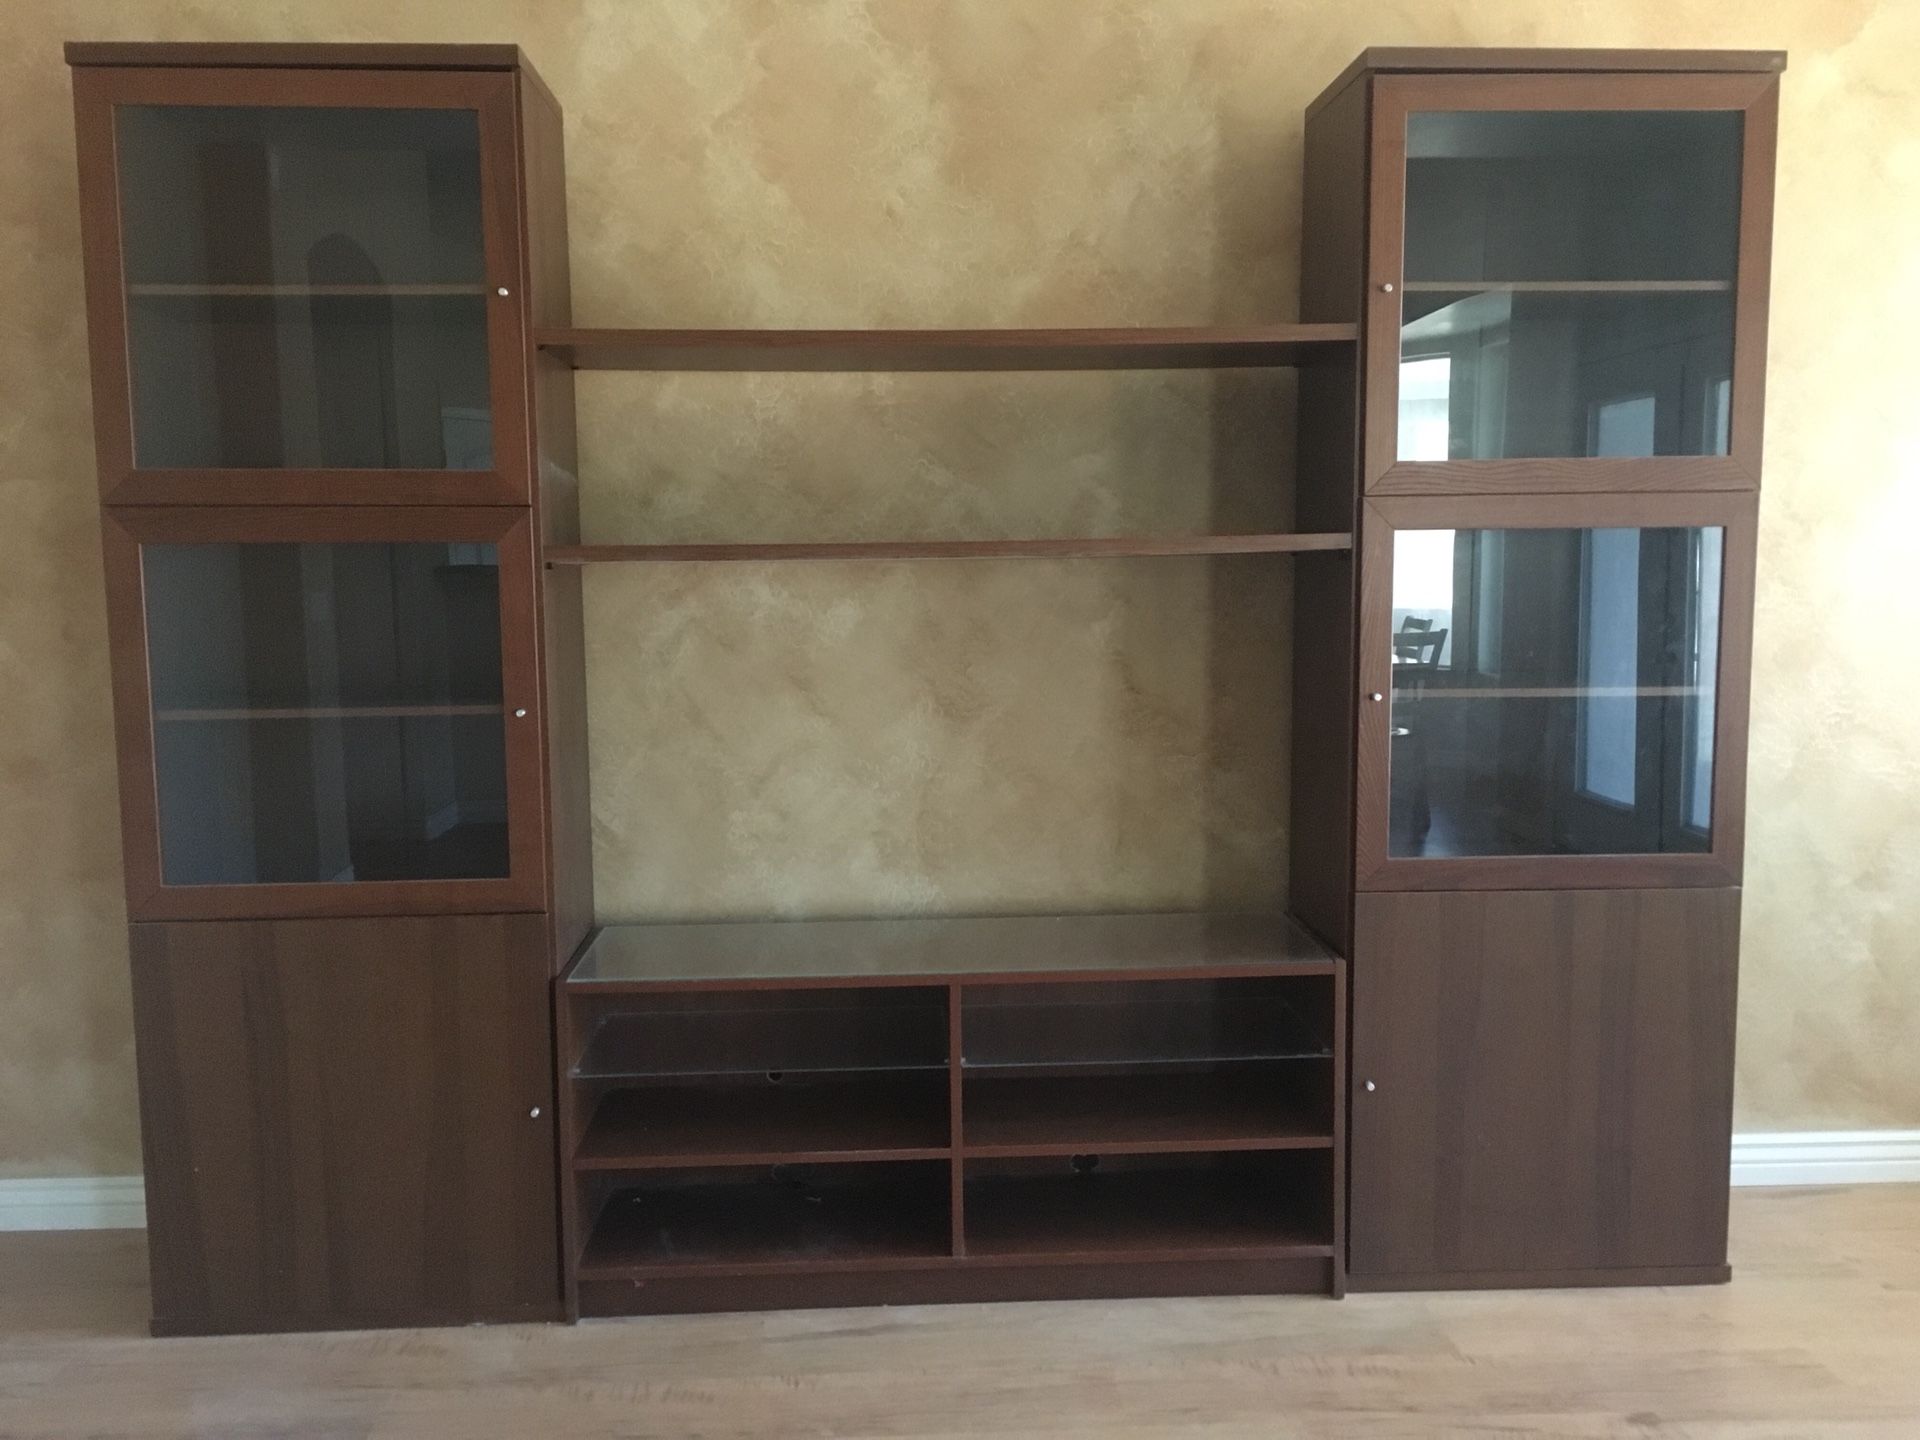 Entertainment center with matching shelves